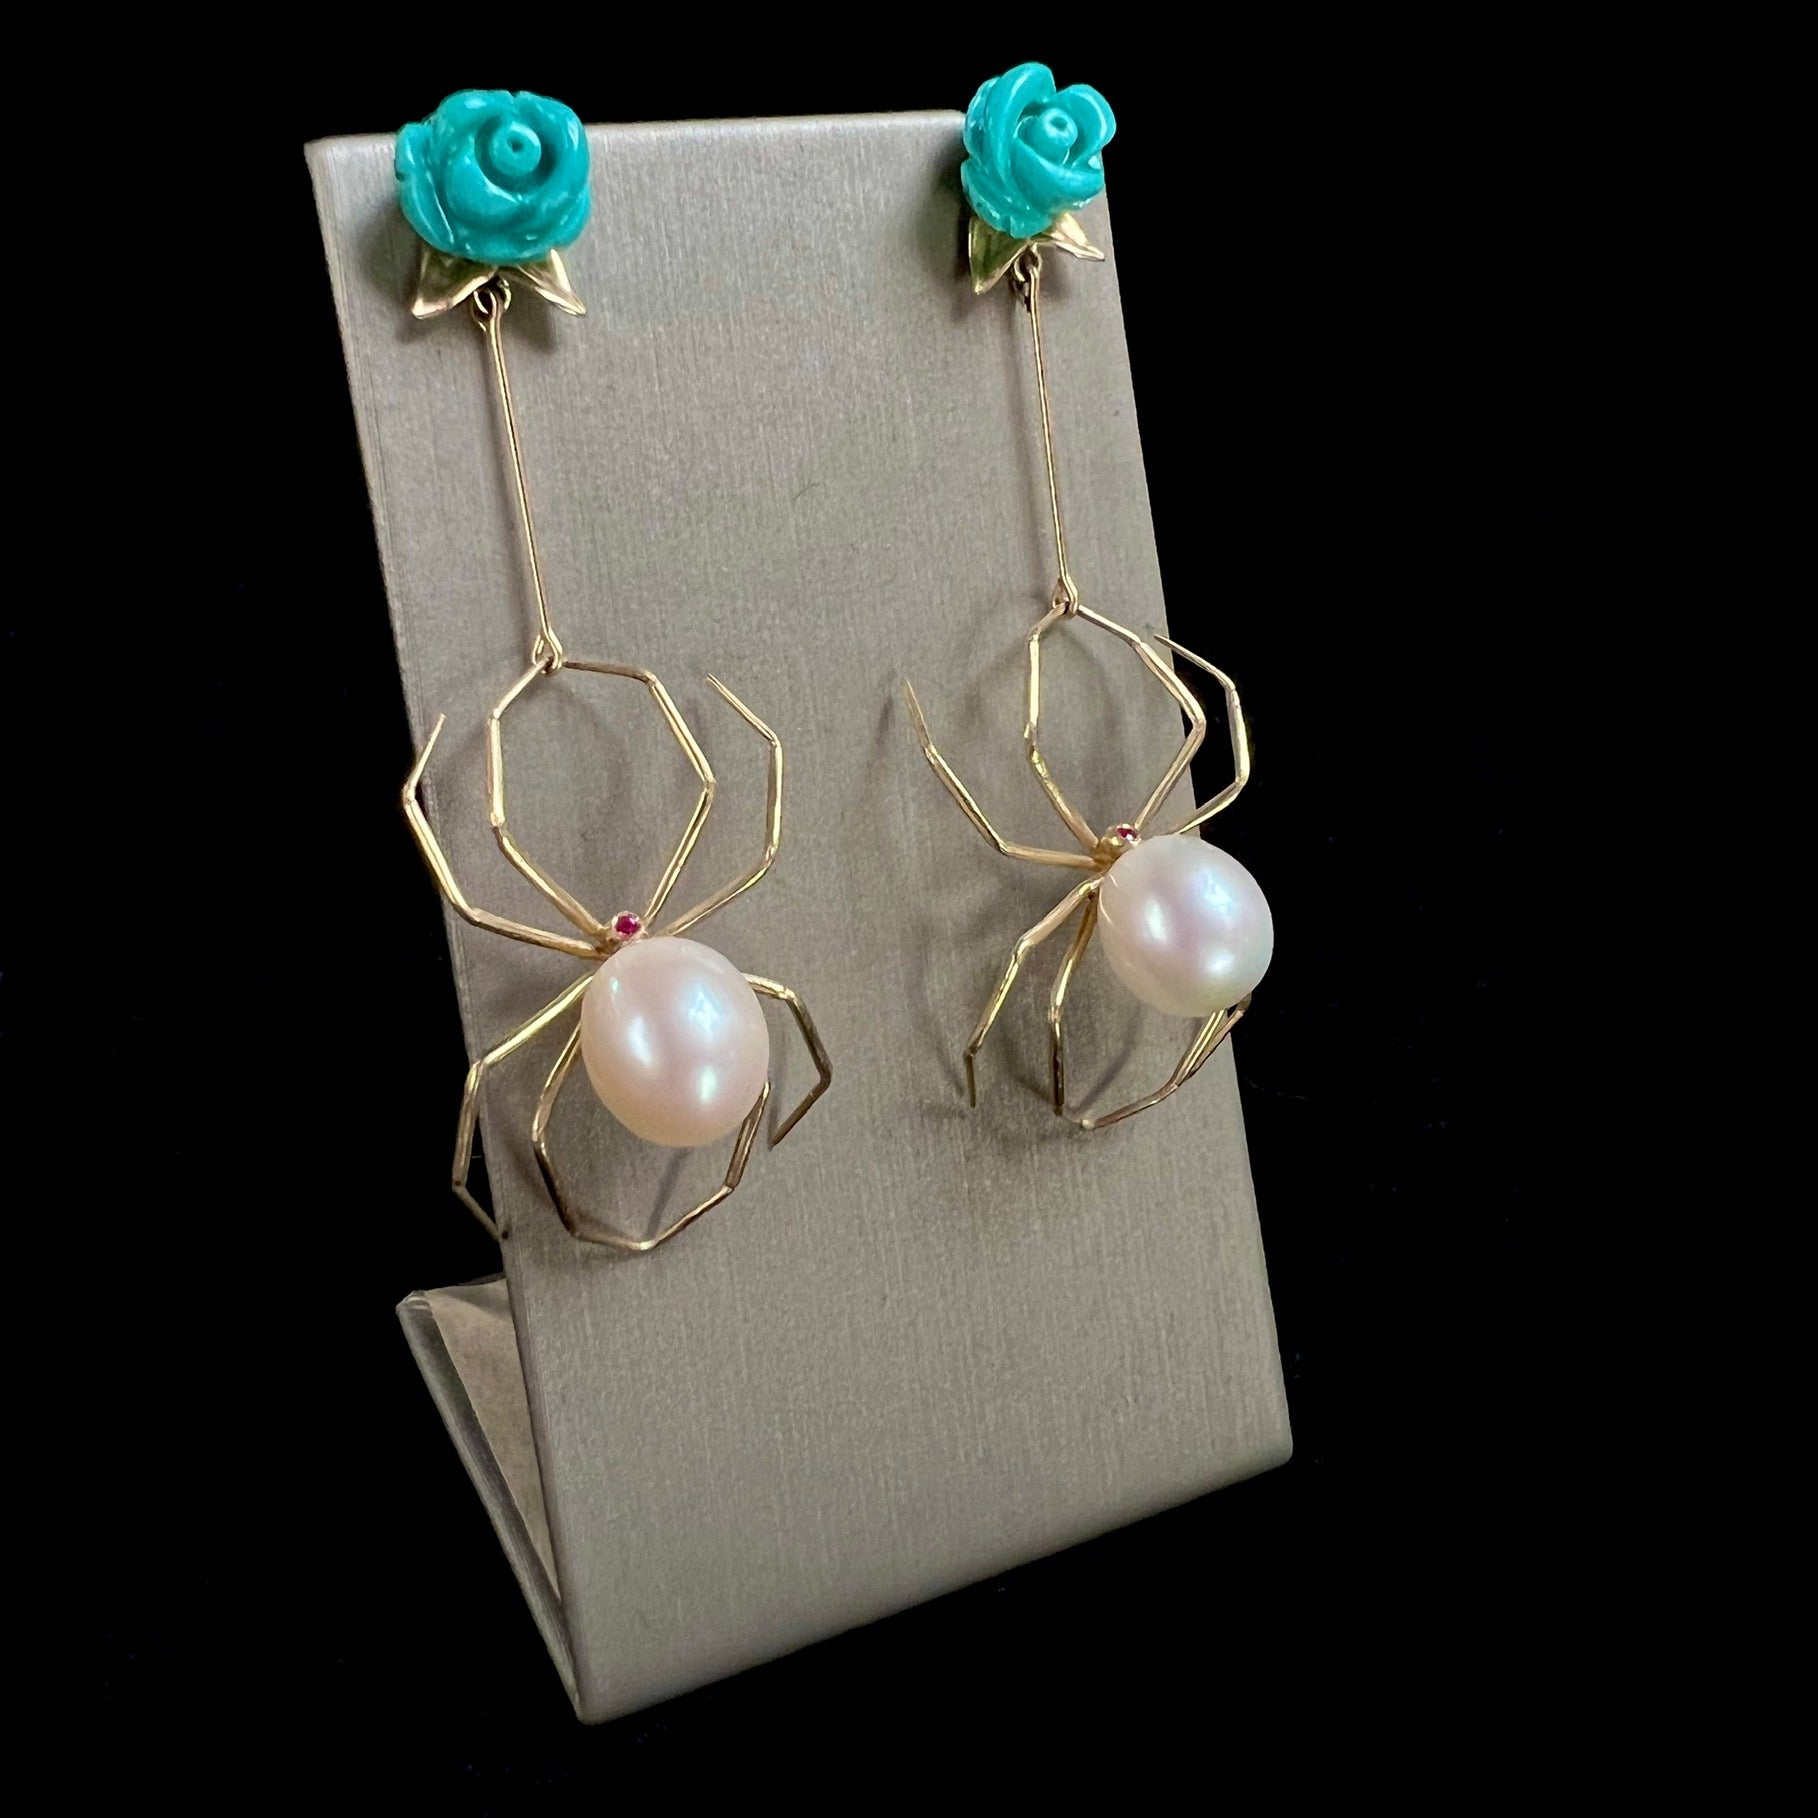 Front view of Turquoise and Pearl Spider Earrings on display stand